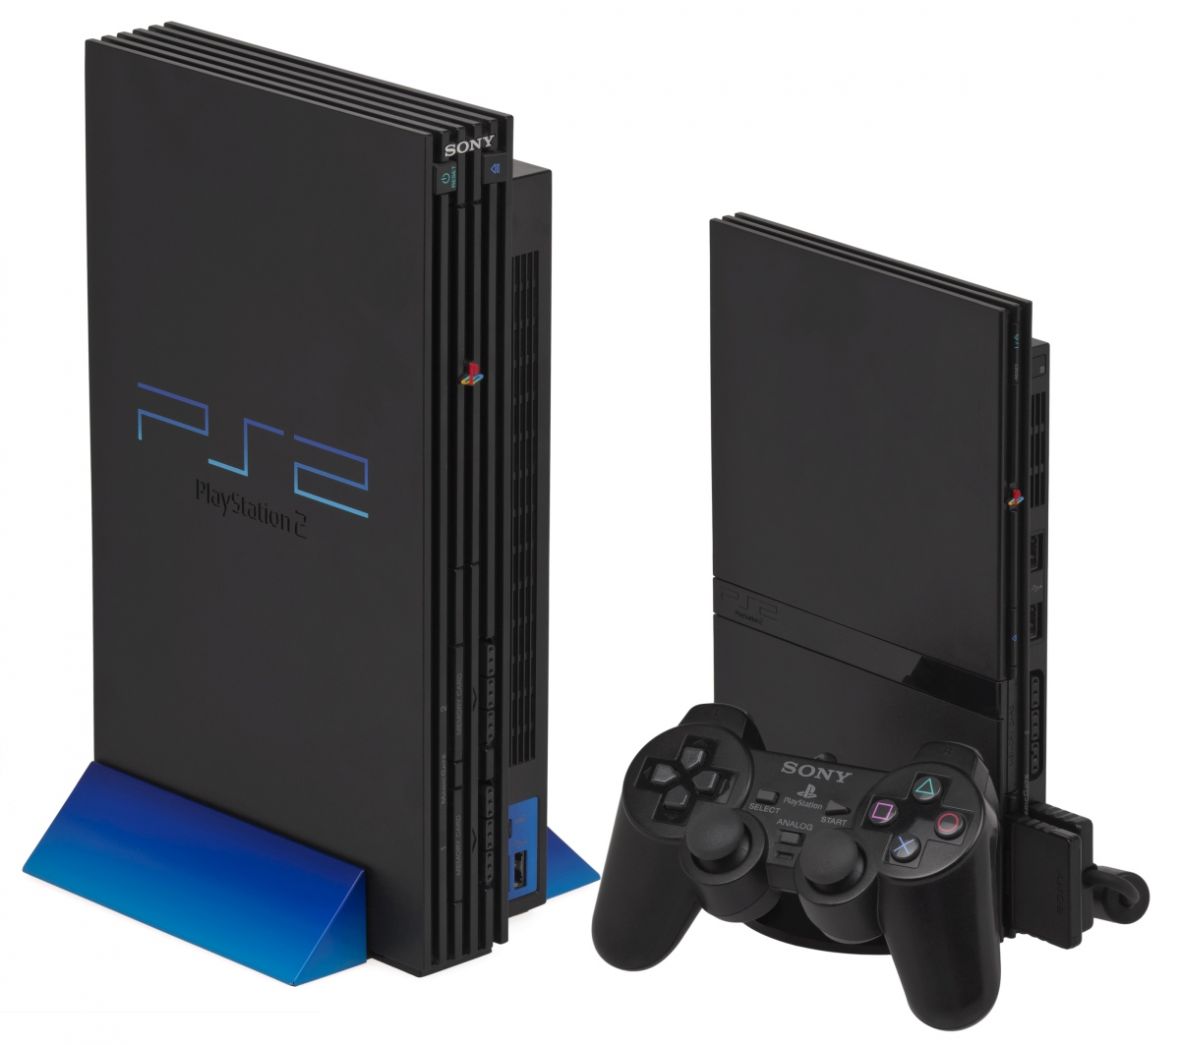 Playstation 2 - undefined